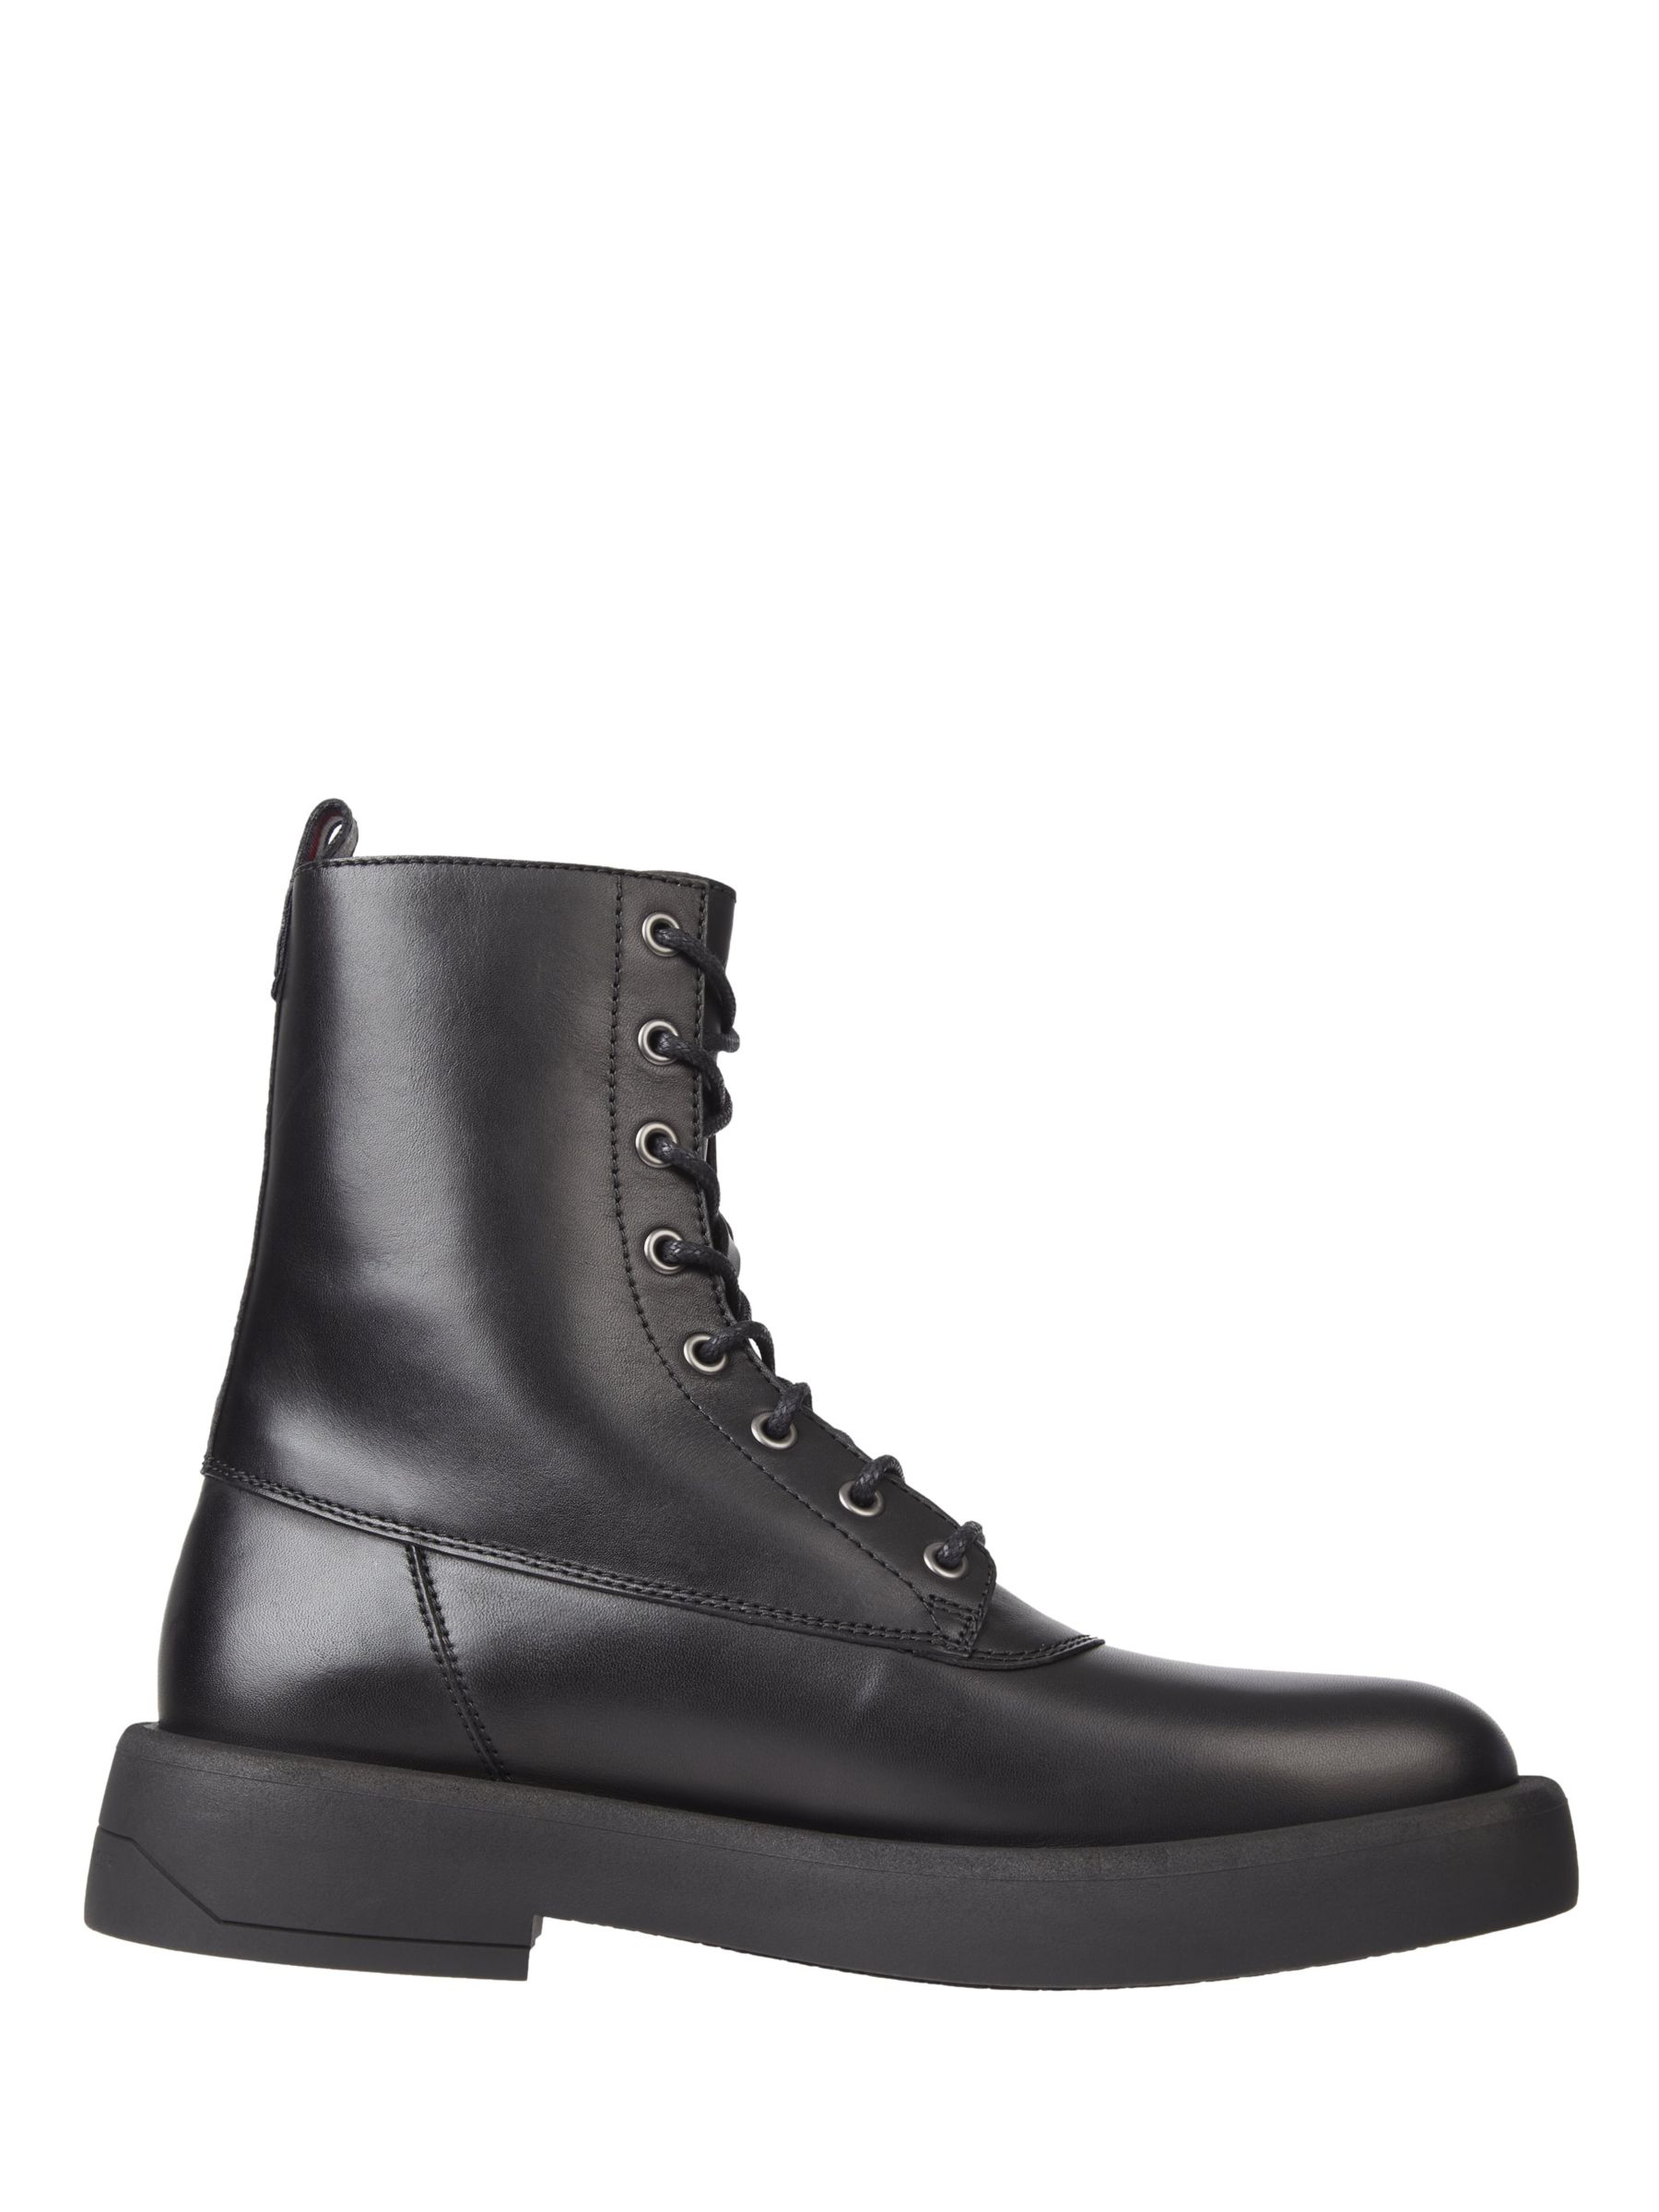 Tommy Hilfiger Leather Lace Up Boots, Black at John Lewis & Partners